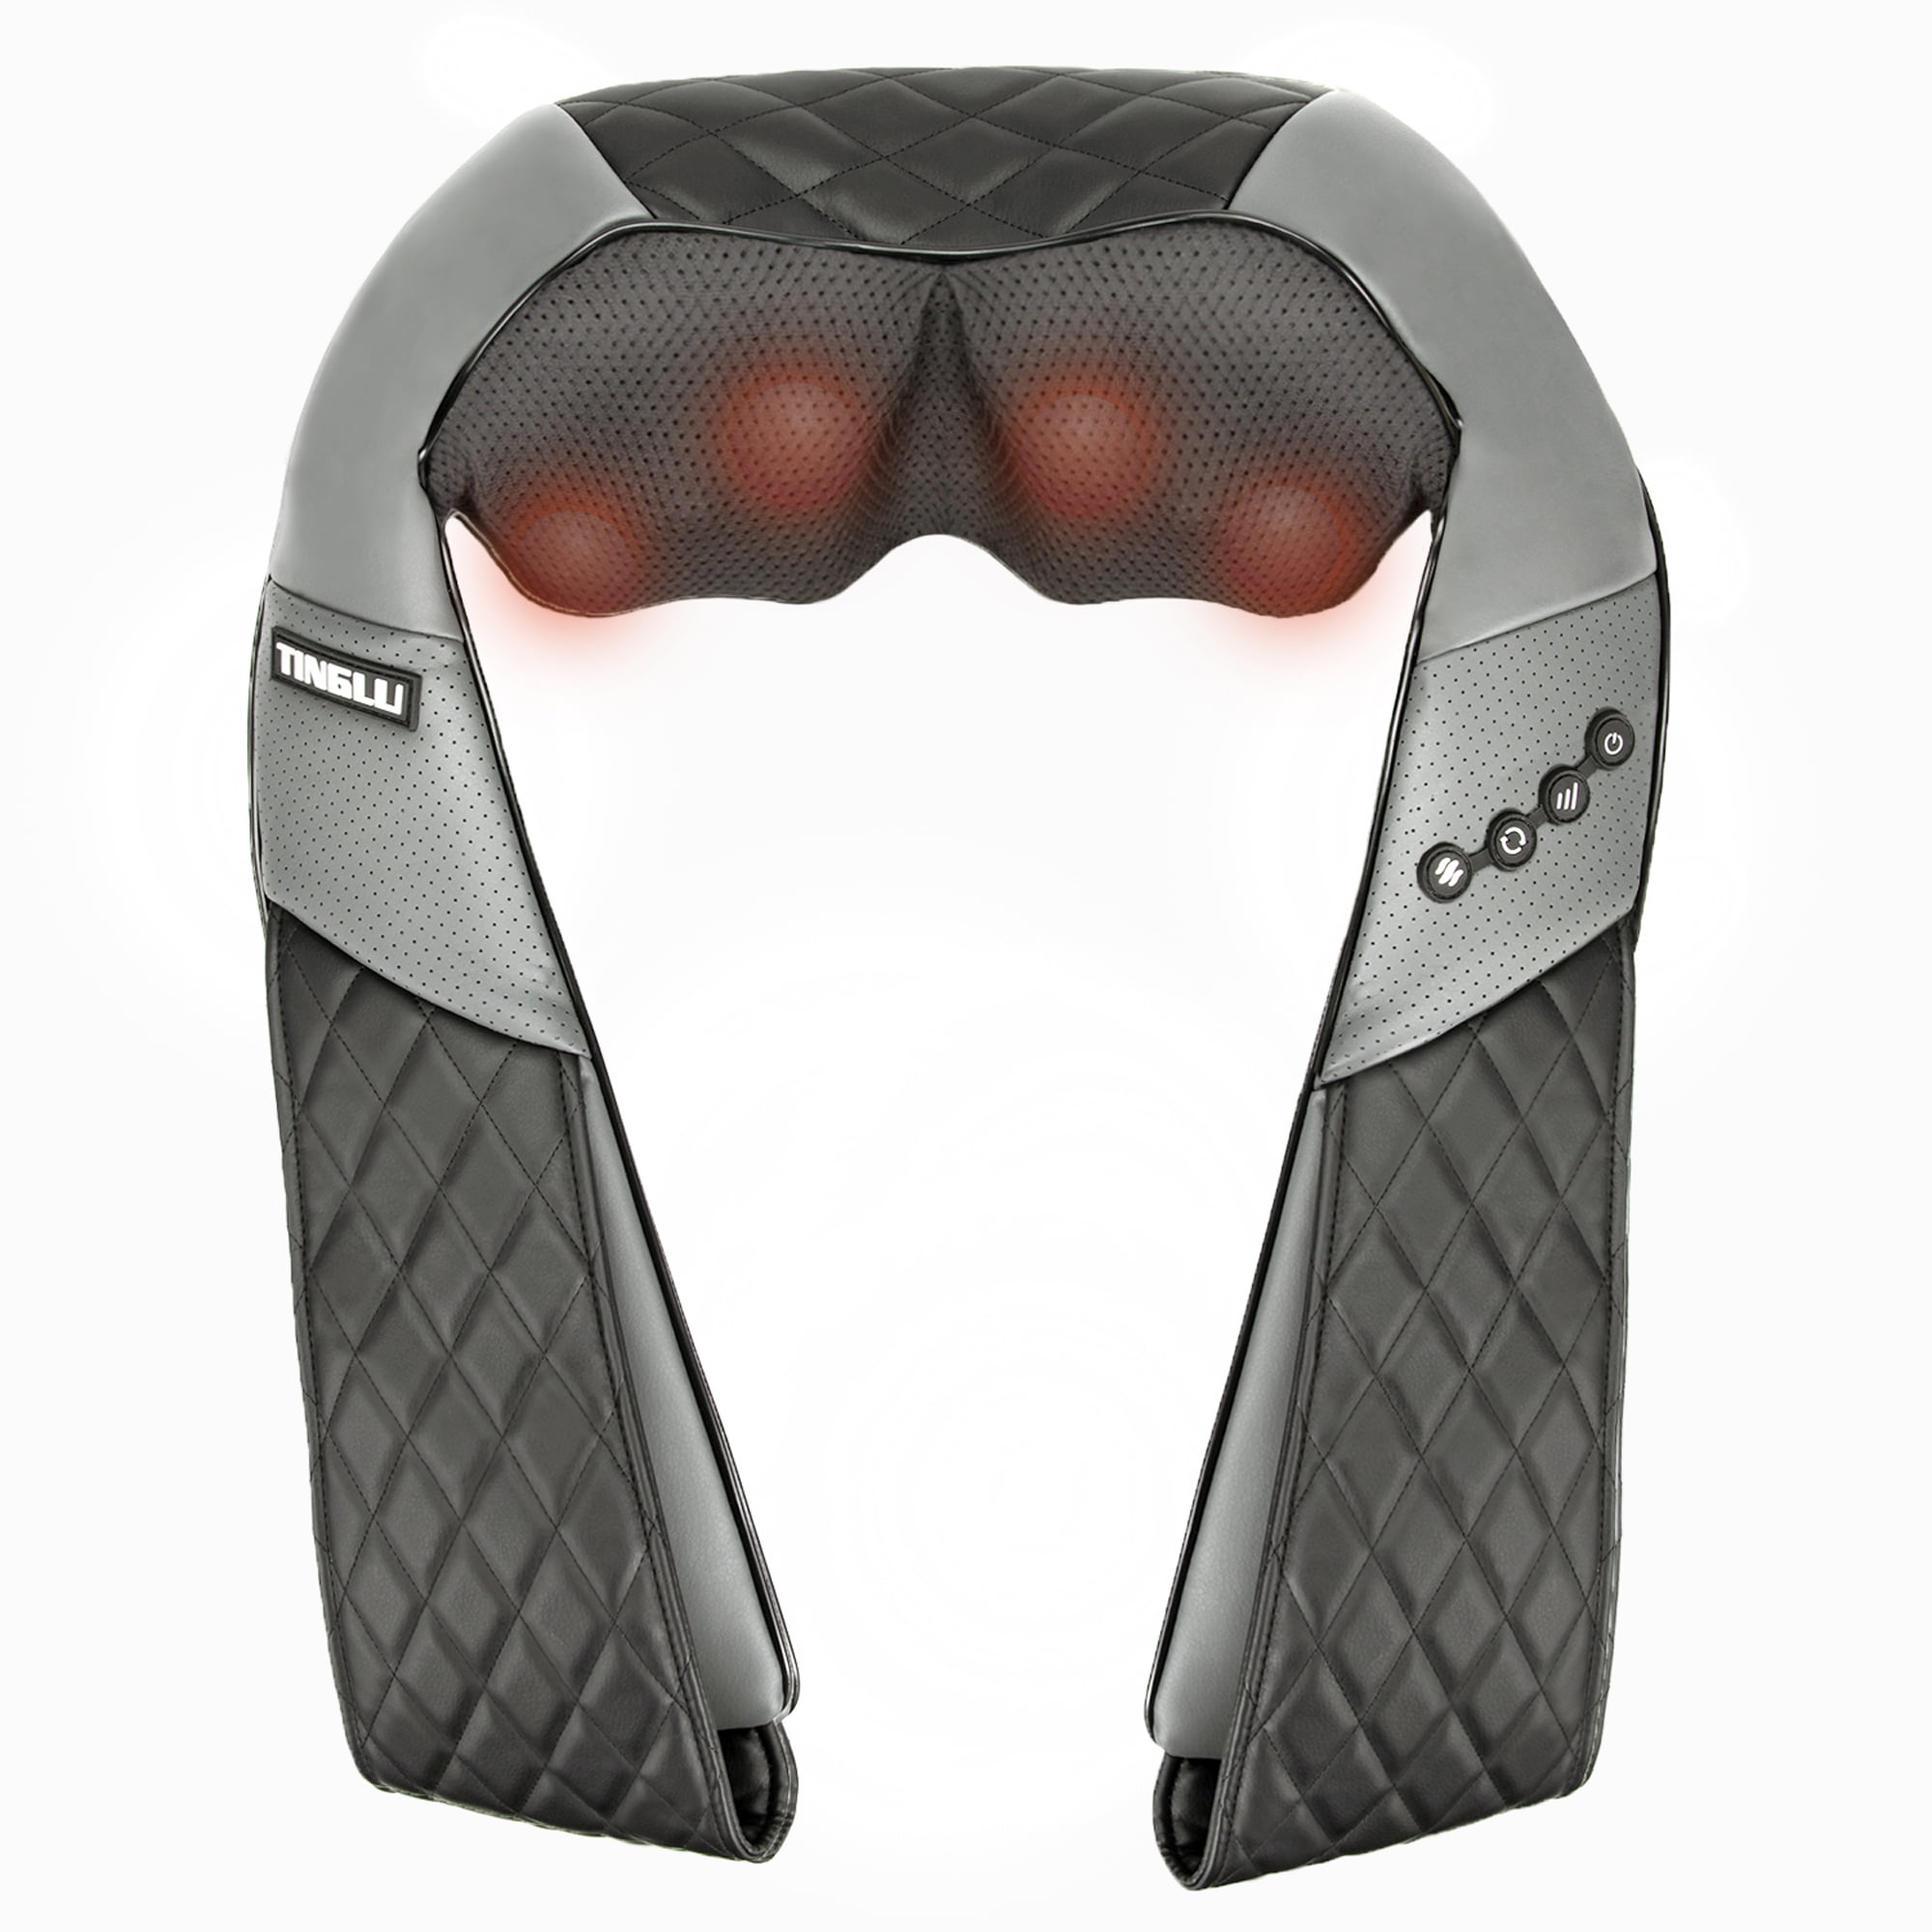 Nk Home Shiatsu Back And Neck Massager With Heat And Deep Kneading Massage For Neck Back And